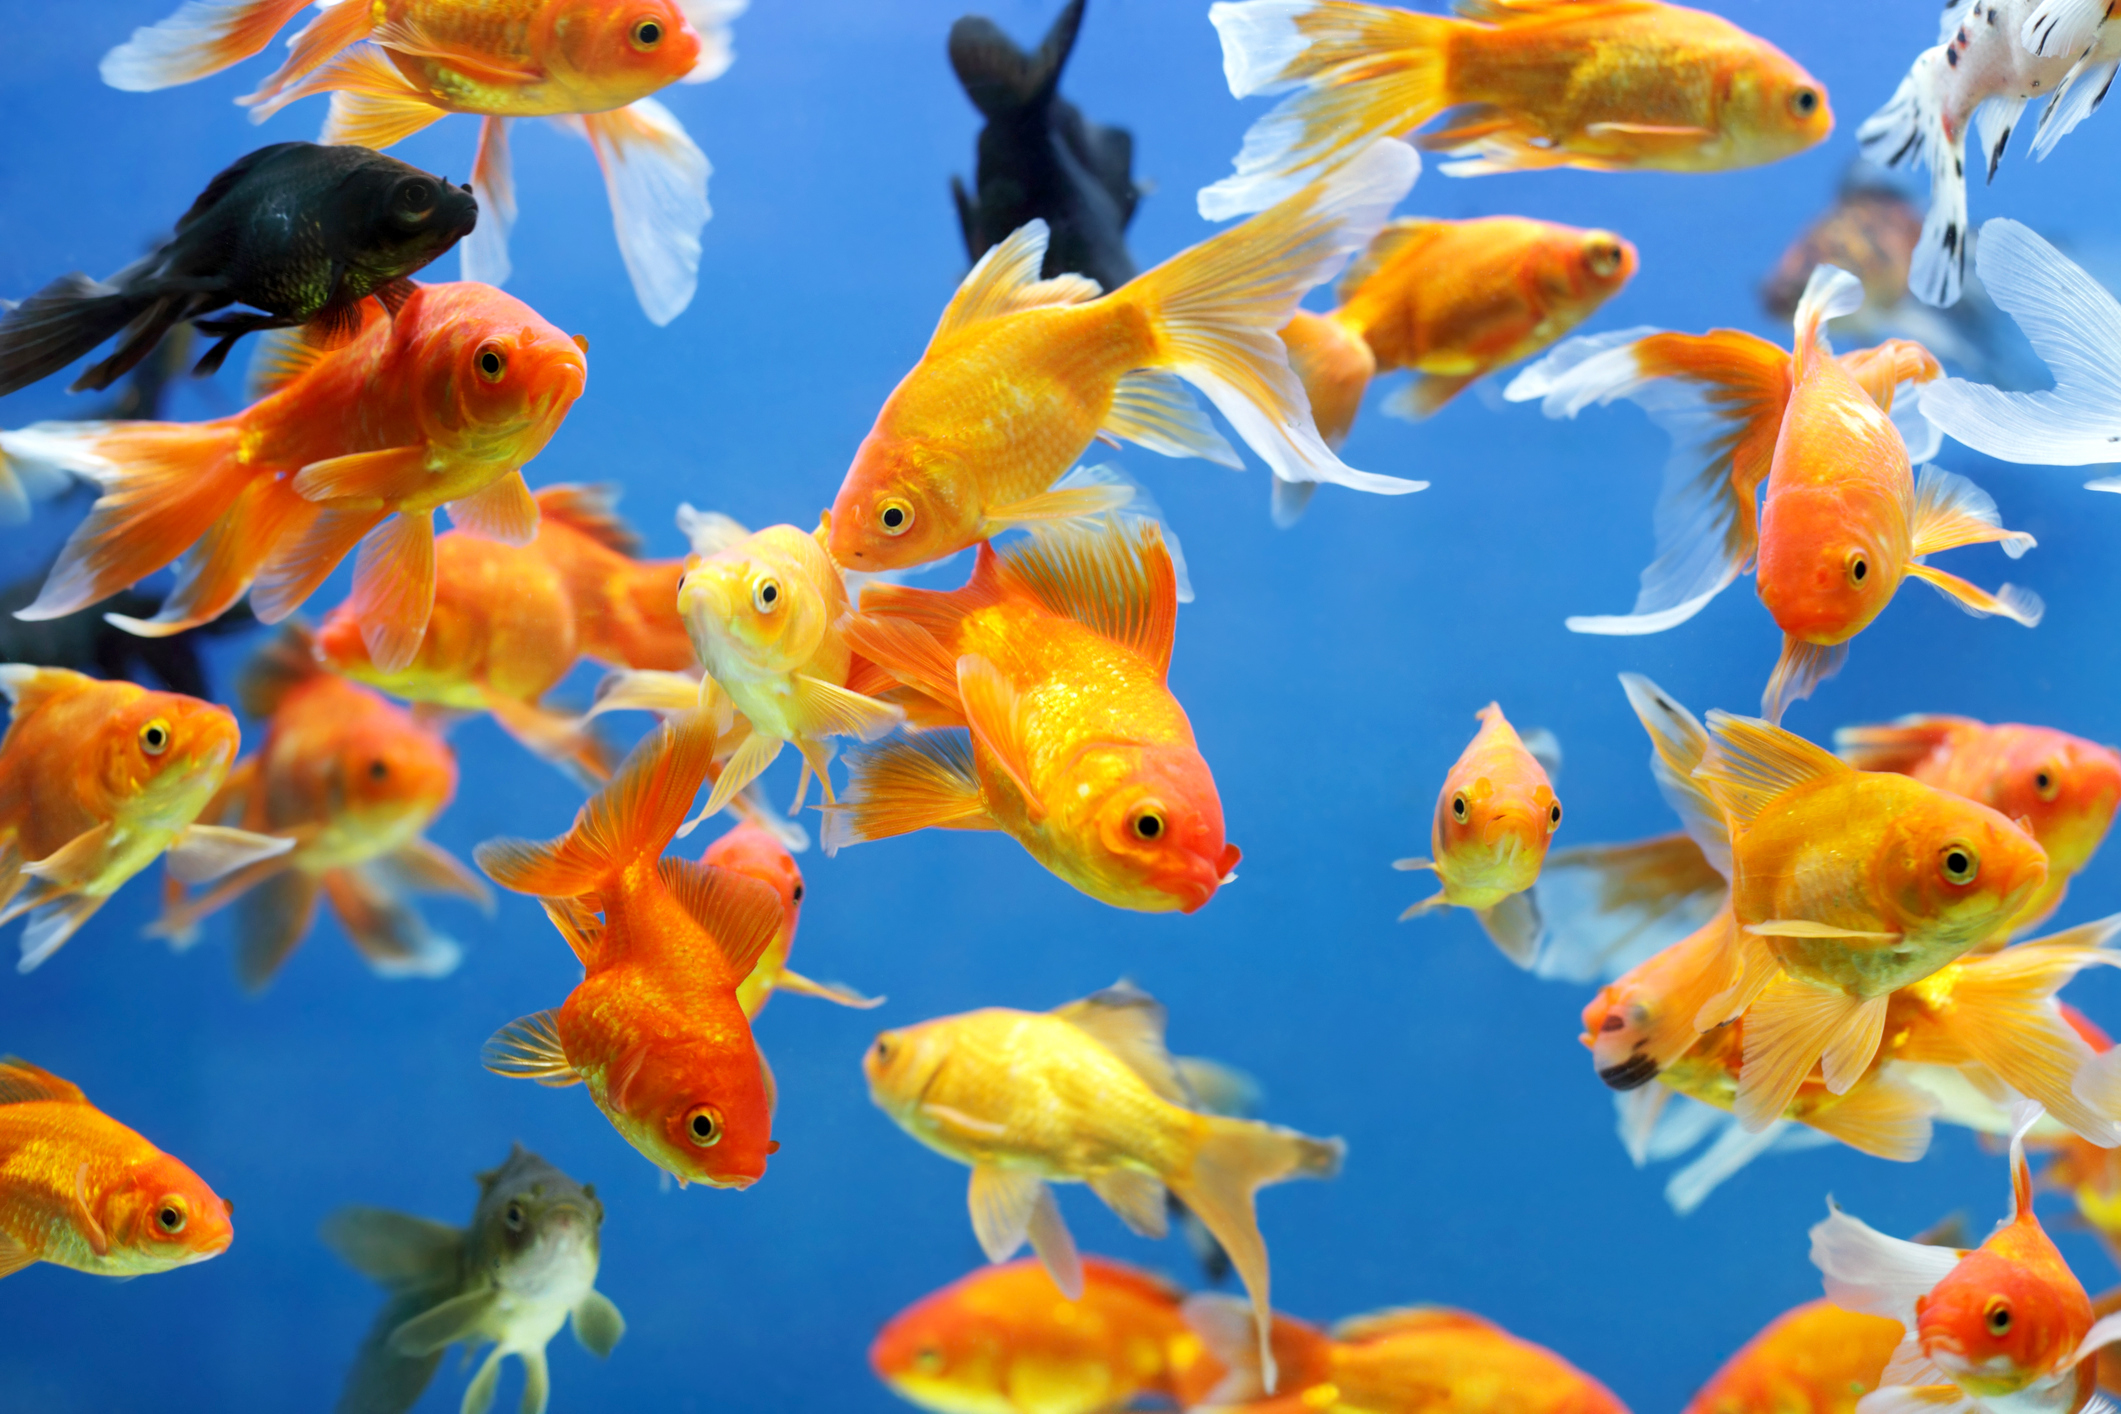 A colorful school of fish swims in an aquarium.